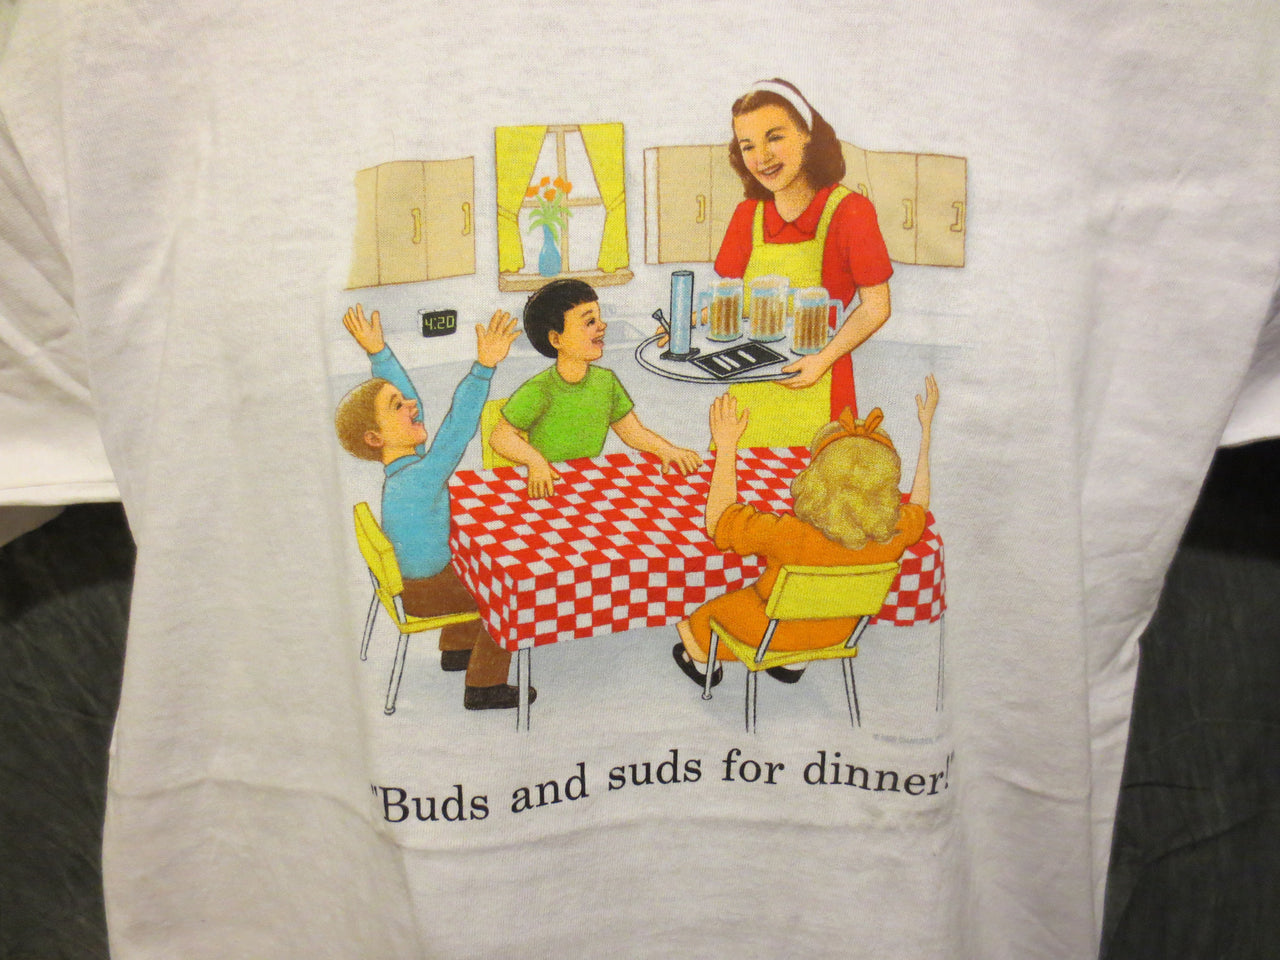 Childhood Buds and Suds for Dinner Adult White Tshirt - TshirtNow.net - 1